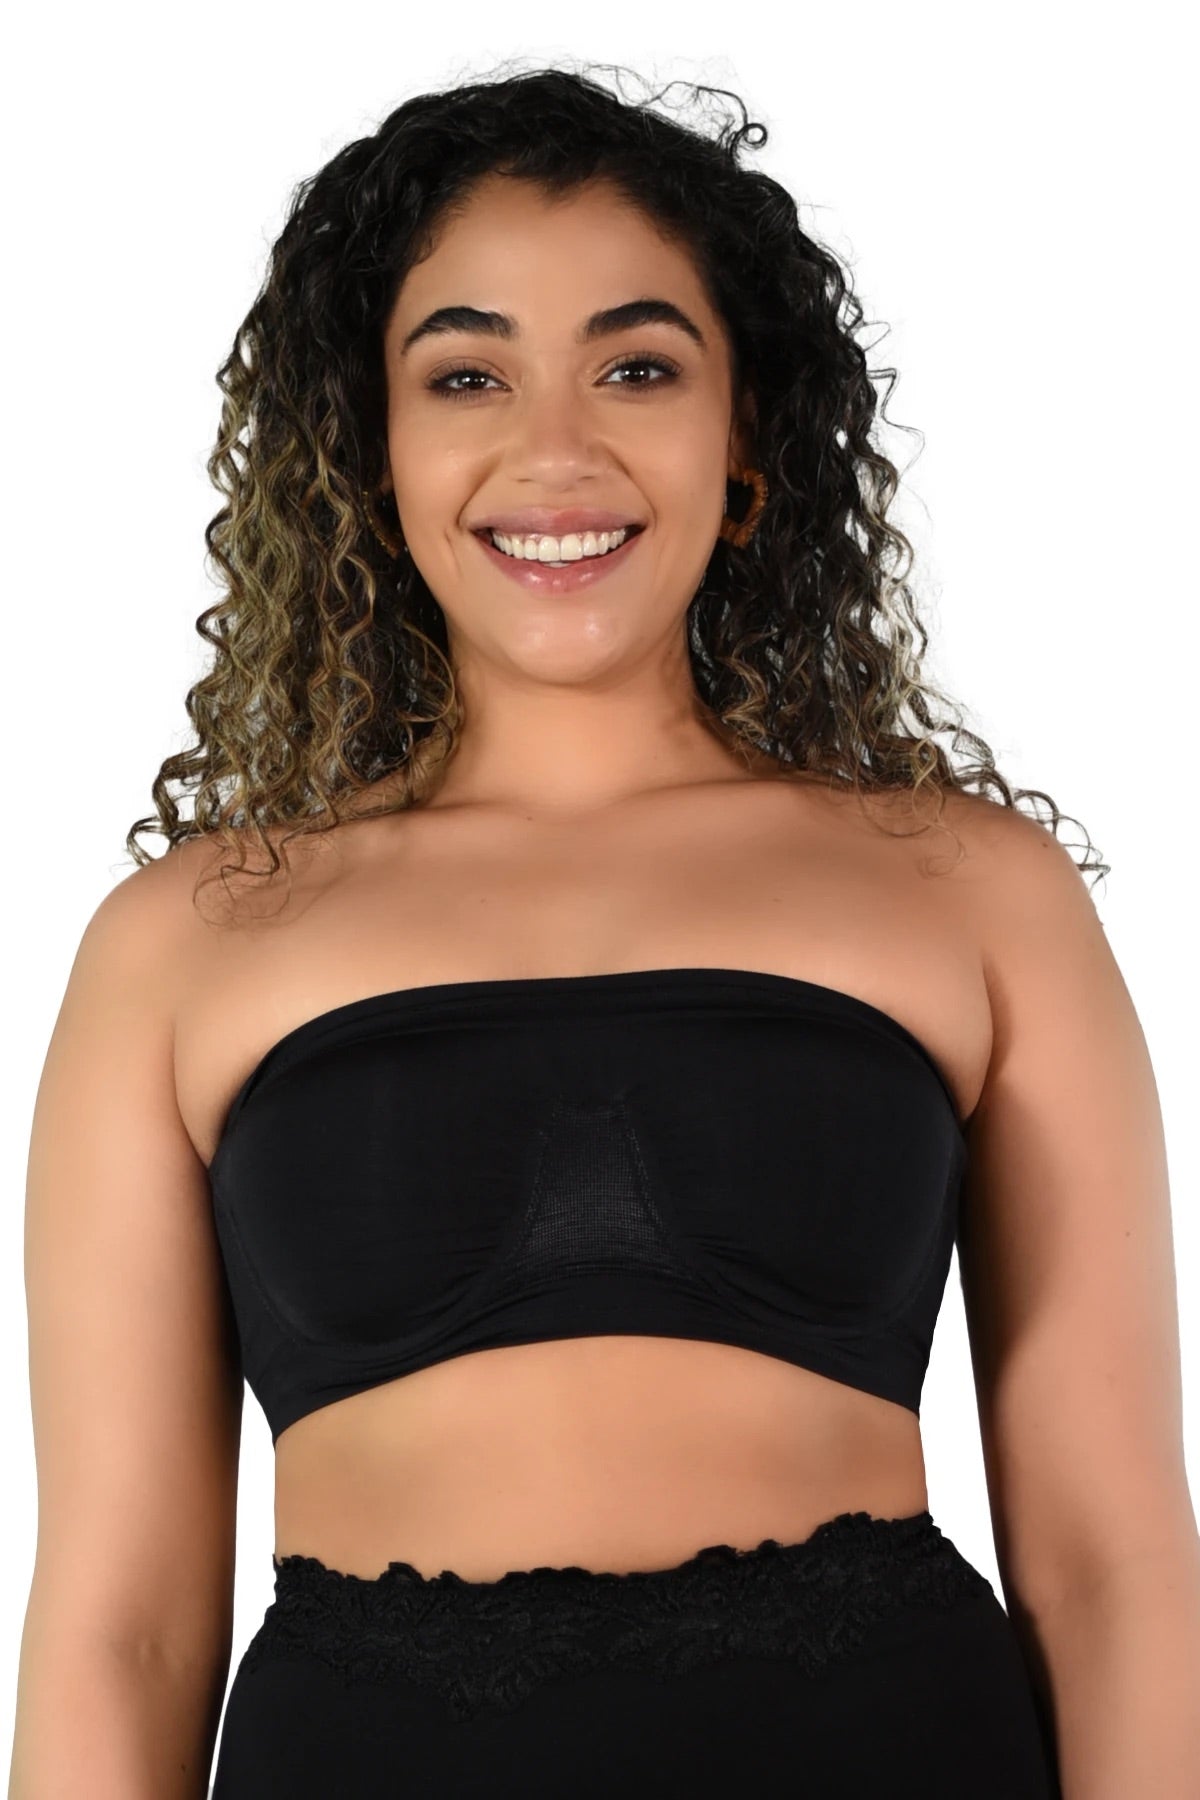 Seamless Underwire Bandeau Bra - Black ONLY 1 S LEFT